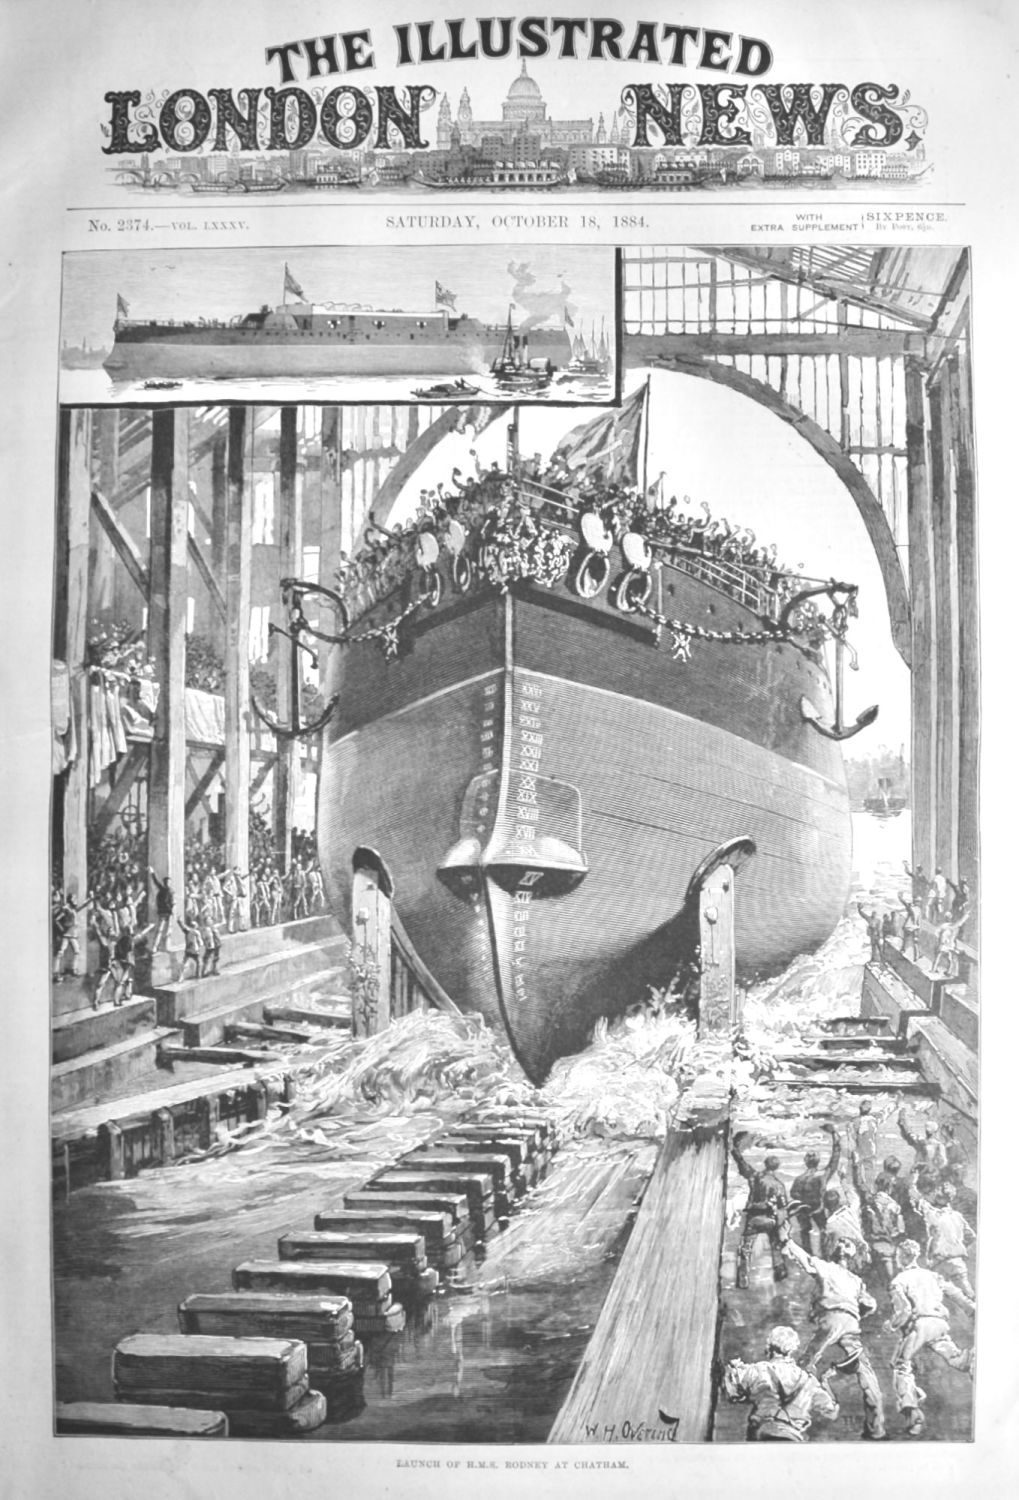 Launch of H.M.S. Rodney at Chatham.  1884.